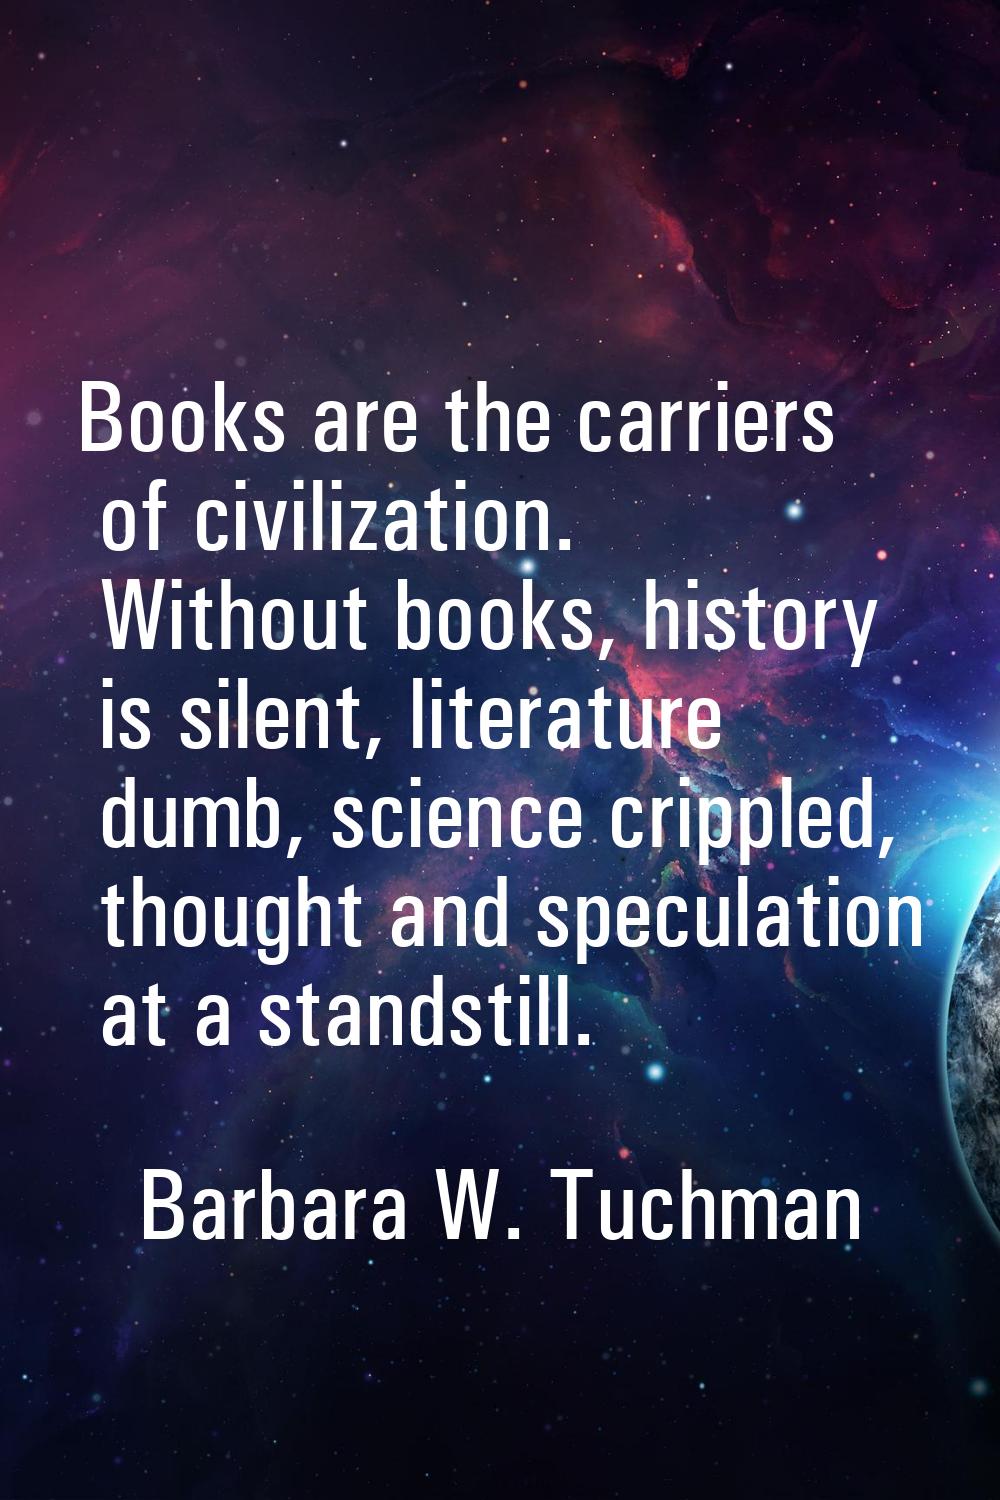 Books are the carriers of civilization. Without books, history is silent, literature dumb, science 